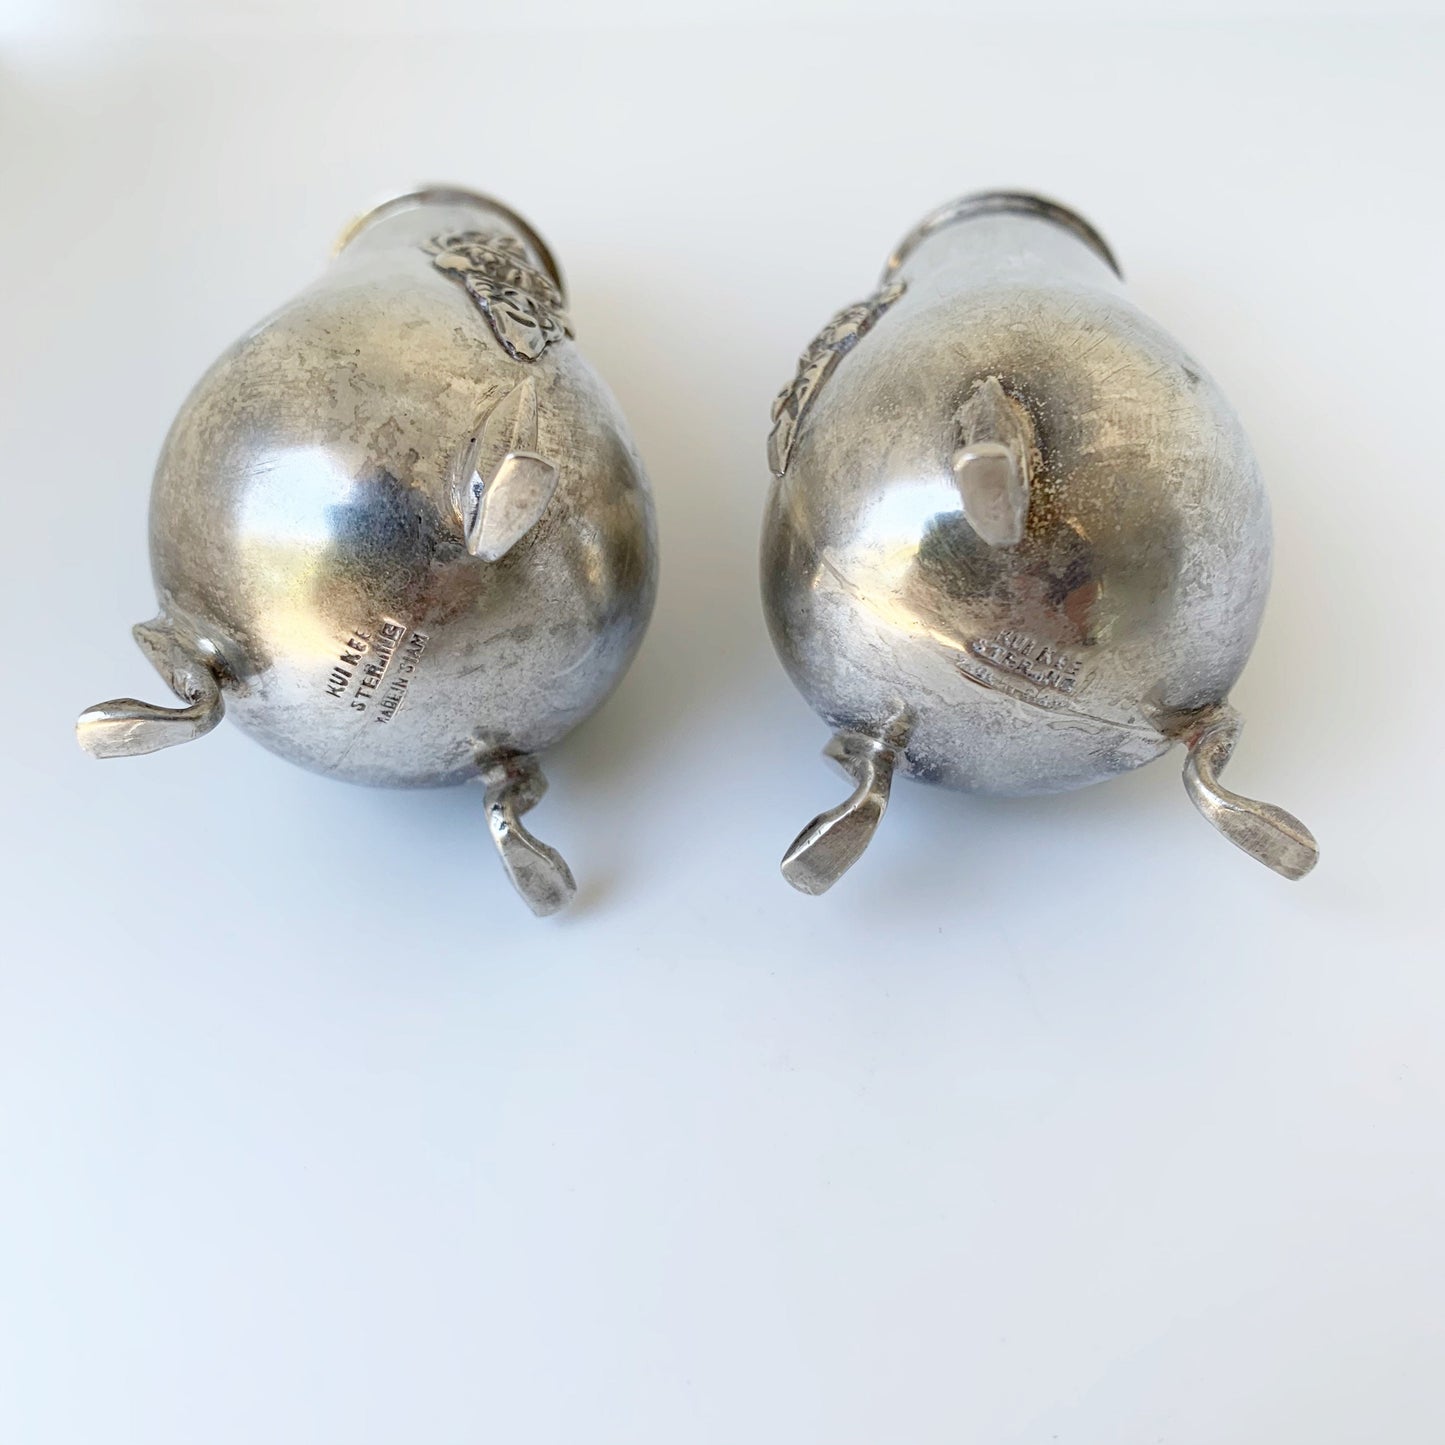 Vintage Sterling Silver Salt and Pepper Shakers | Siam Thailand KUI KEE Sterling